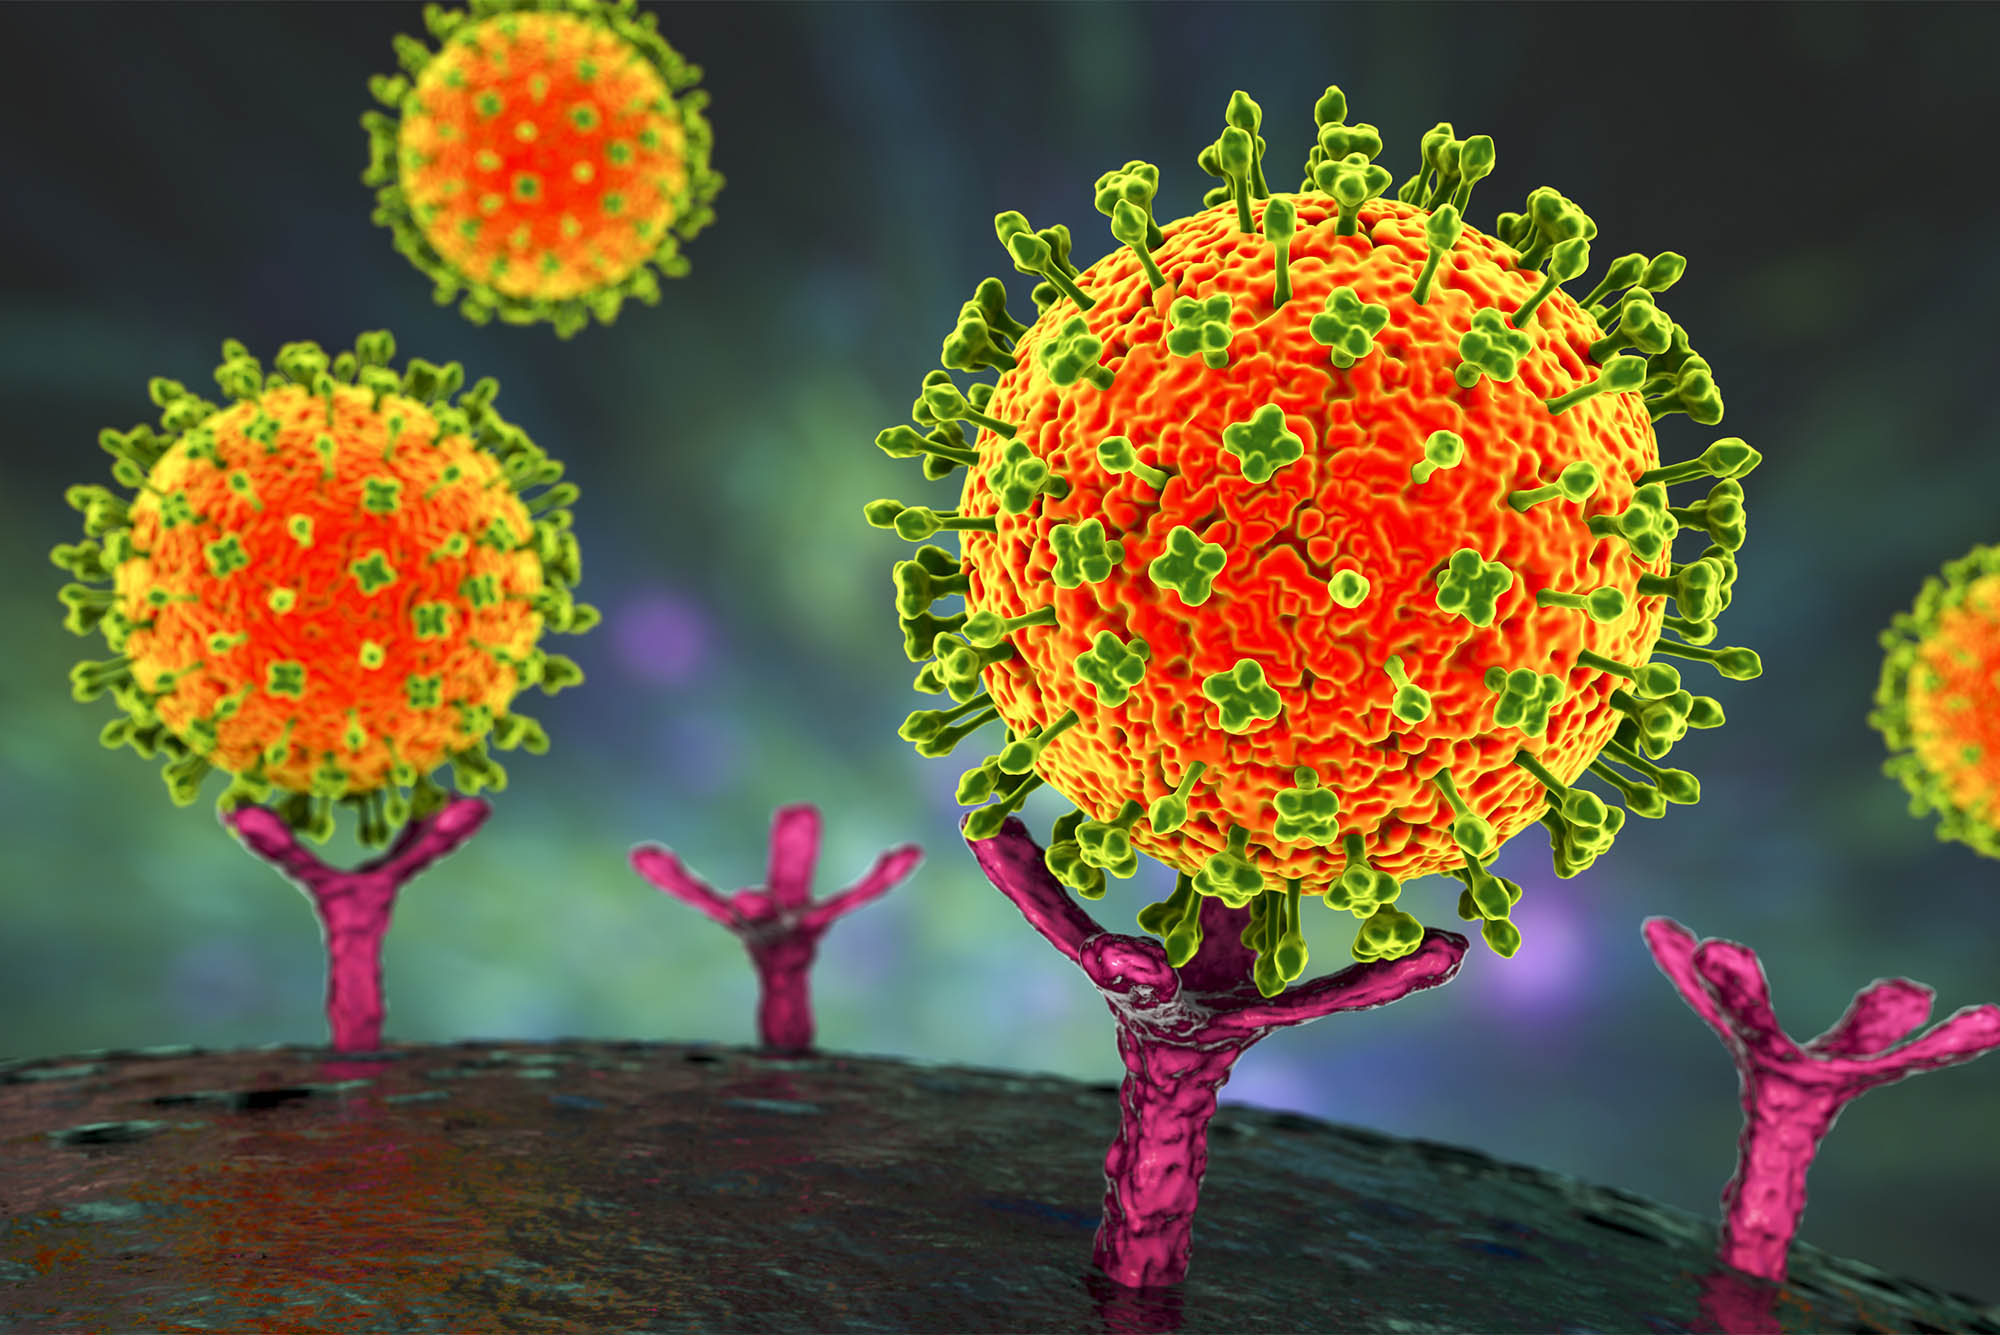 Nipah viruses binding receptors on human cells, an initial stage of Nipah infection. A newly emerging bat-borne virus that causes acute respiratory illness and severe encephalitis, 3D illustration. Large orange balls with spikes surrounding them attach to tree-like structures sticking up off of a large sphere.